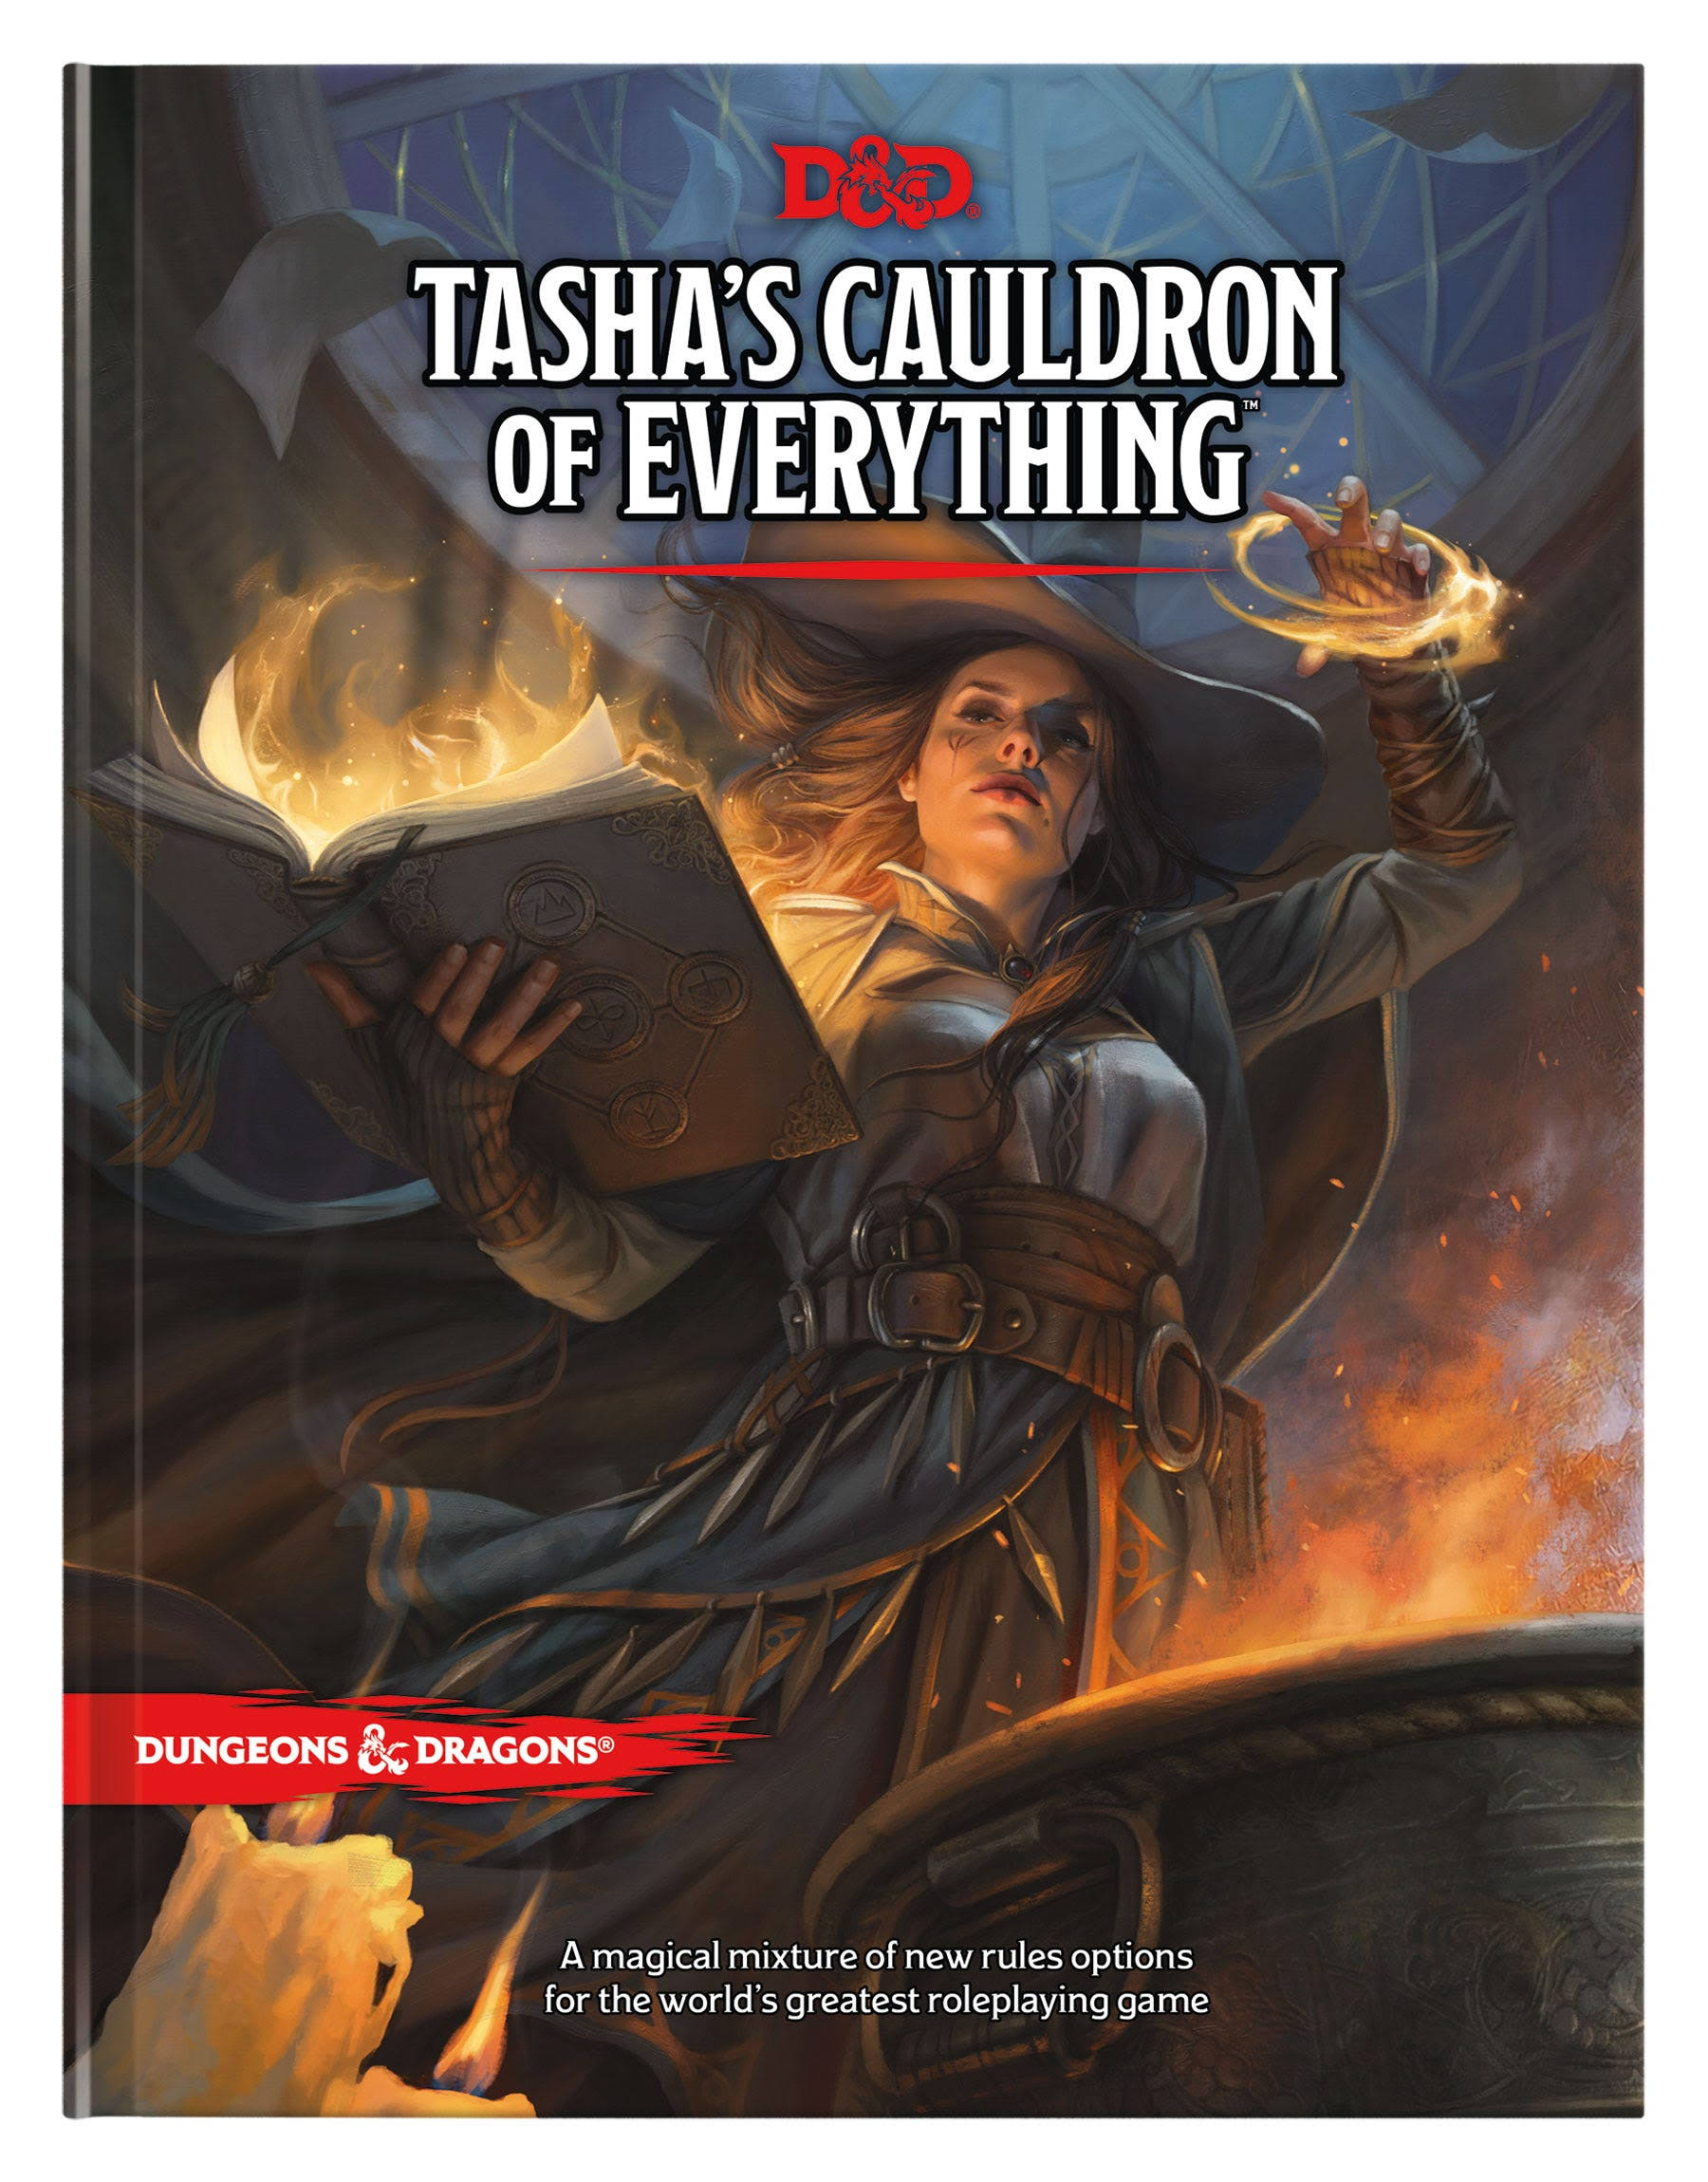 Tasha's Cauldron of Everything (D&D Rules Expansion) (Dungeons & Dragons) [Book]